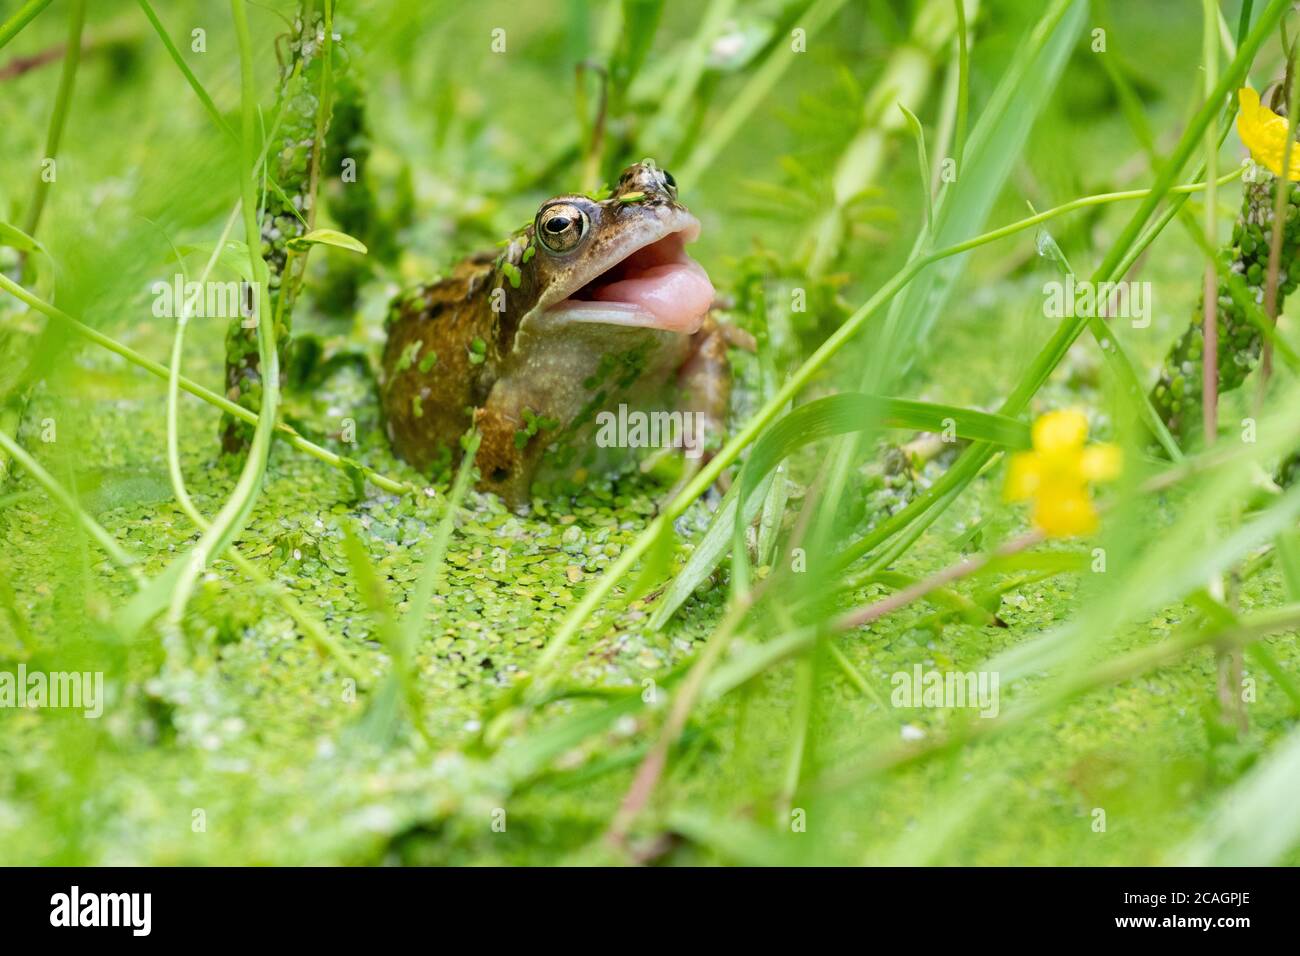 Common frog (Rana temporaria) sitting in garden wildlife pond waiting for insects to pass covered in duckweed with mouth open, Scotland, UK Stock Photo